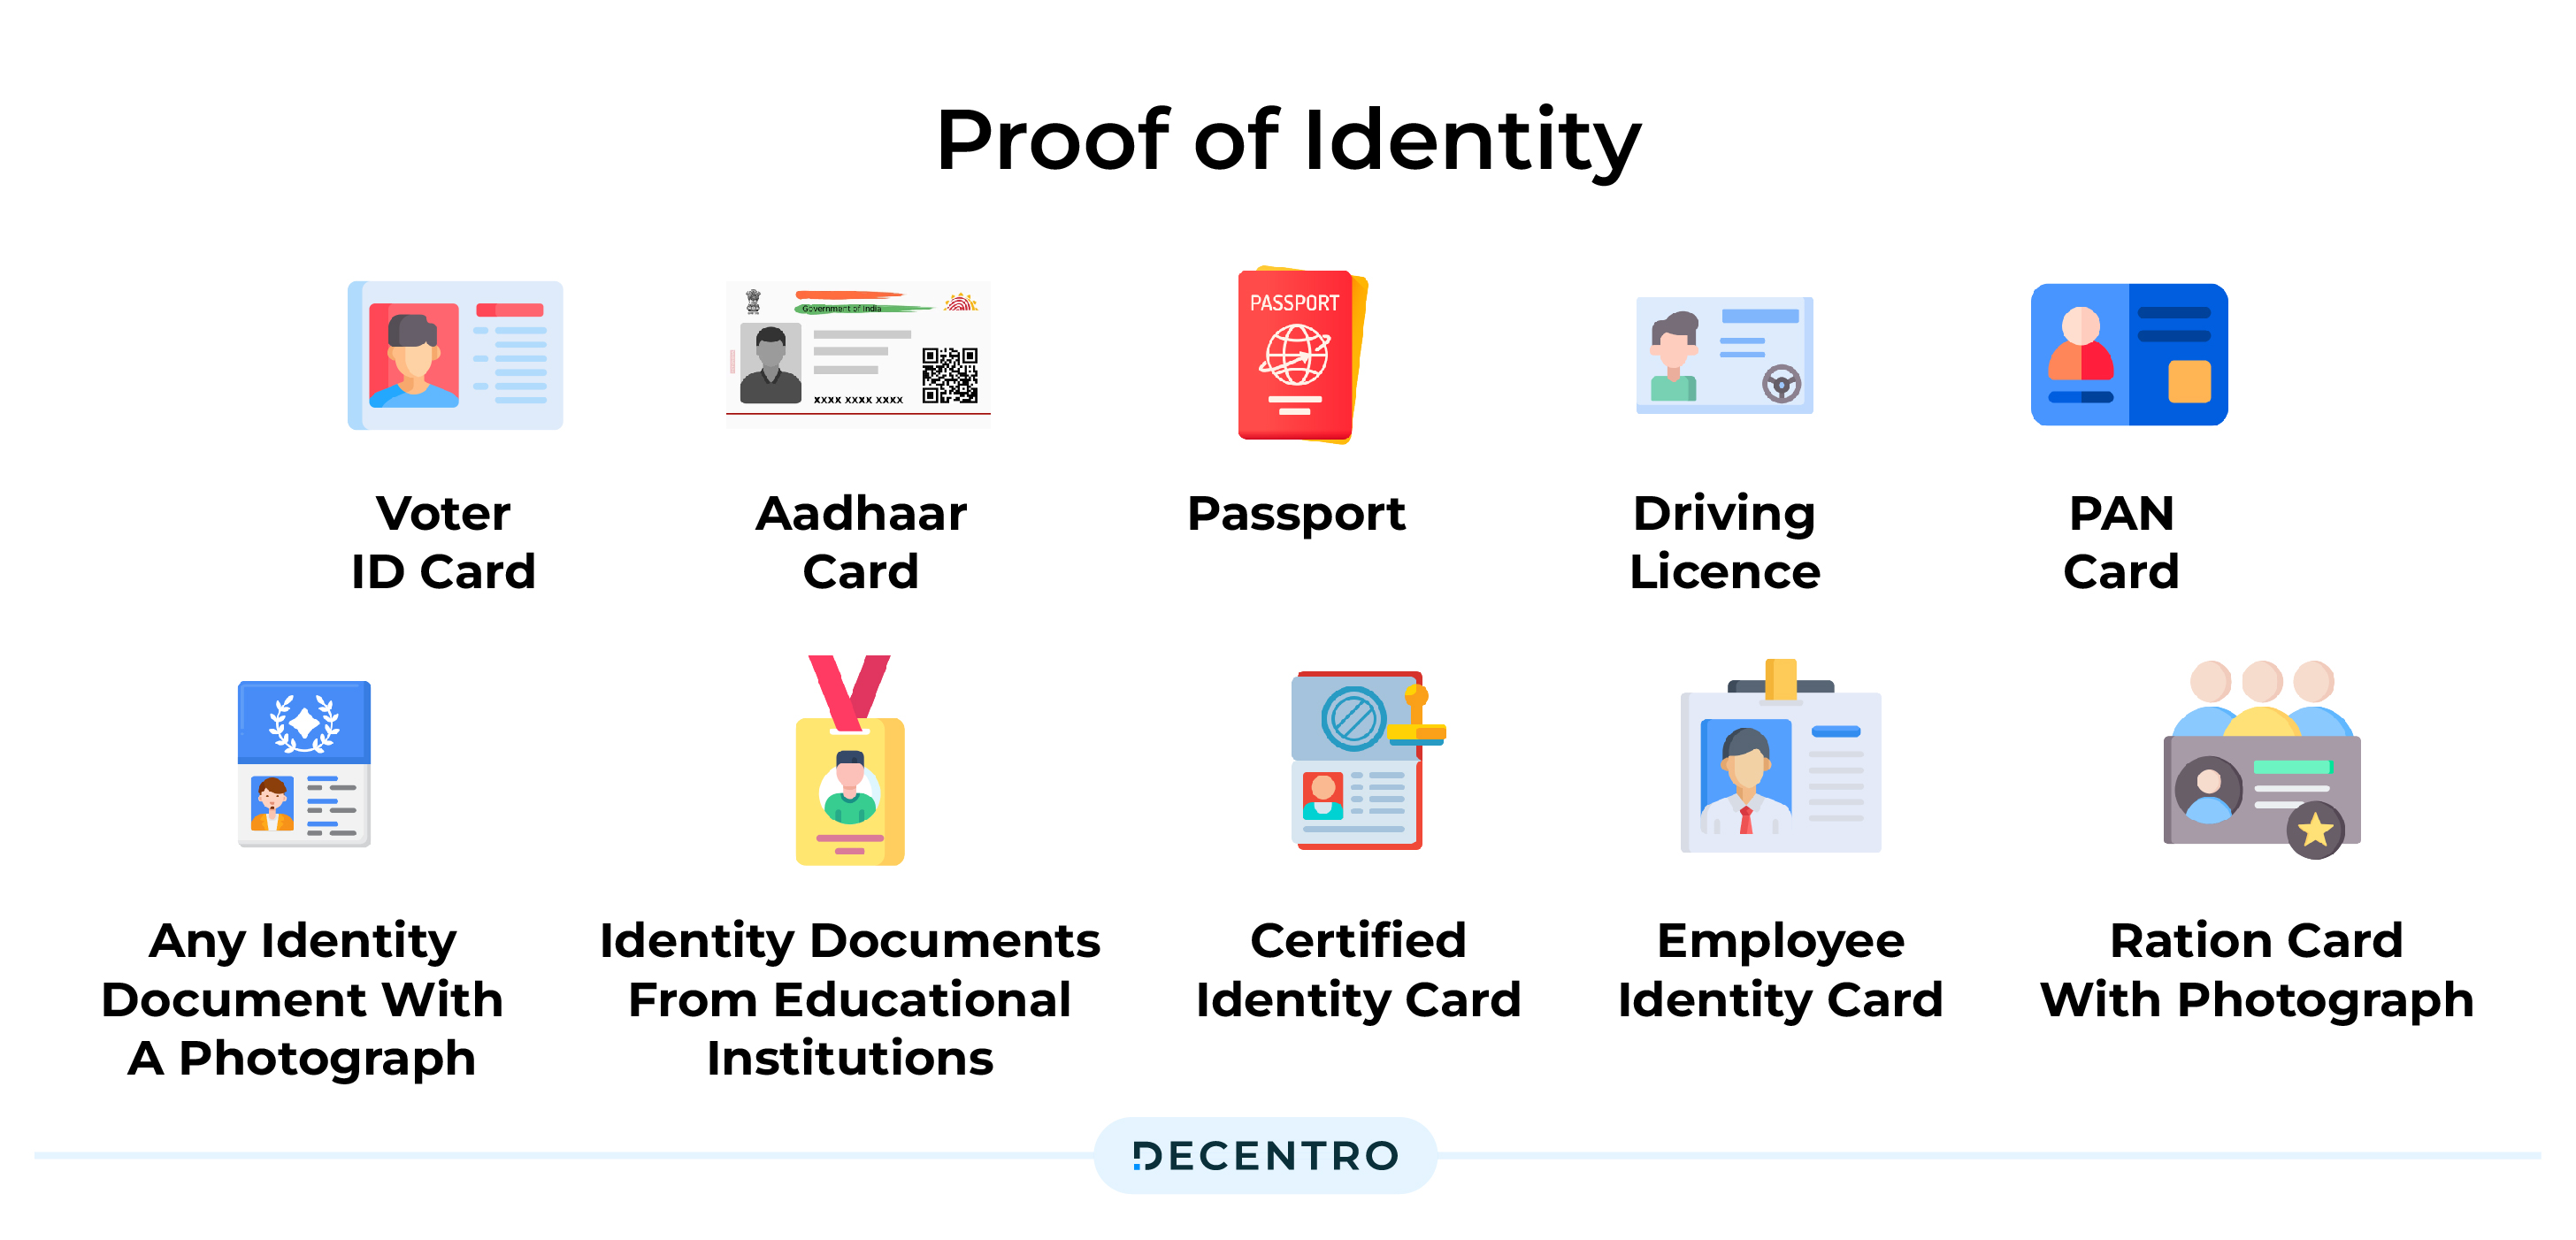 List of Documents - Proof of Identity